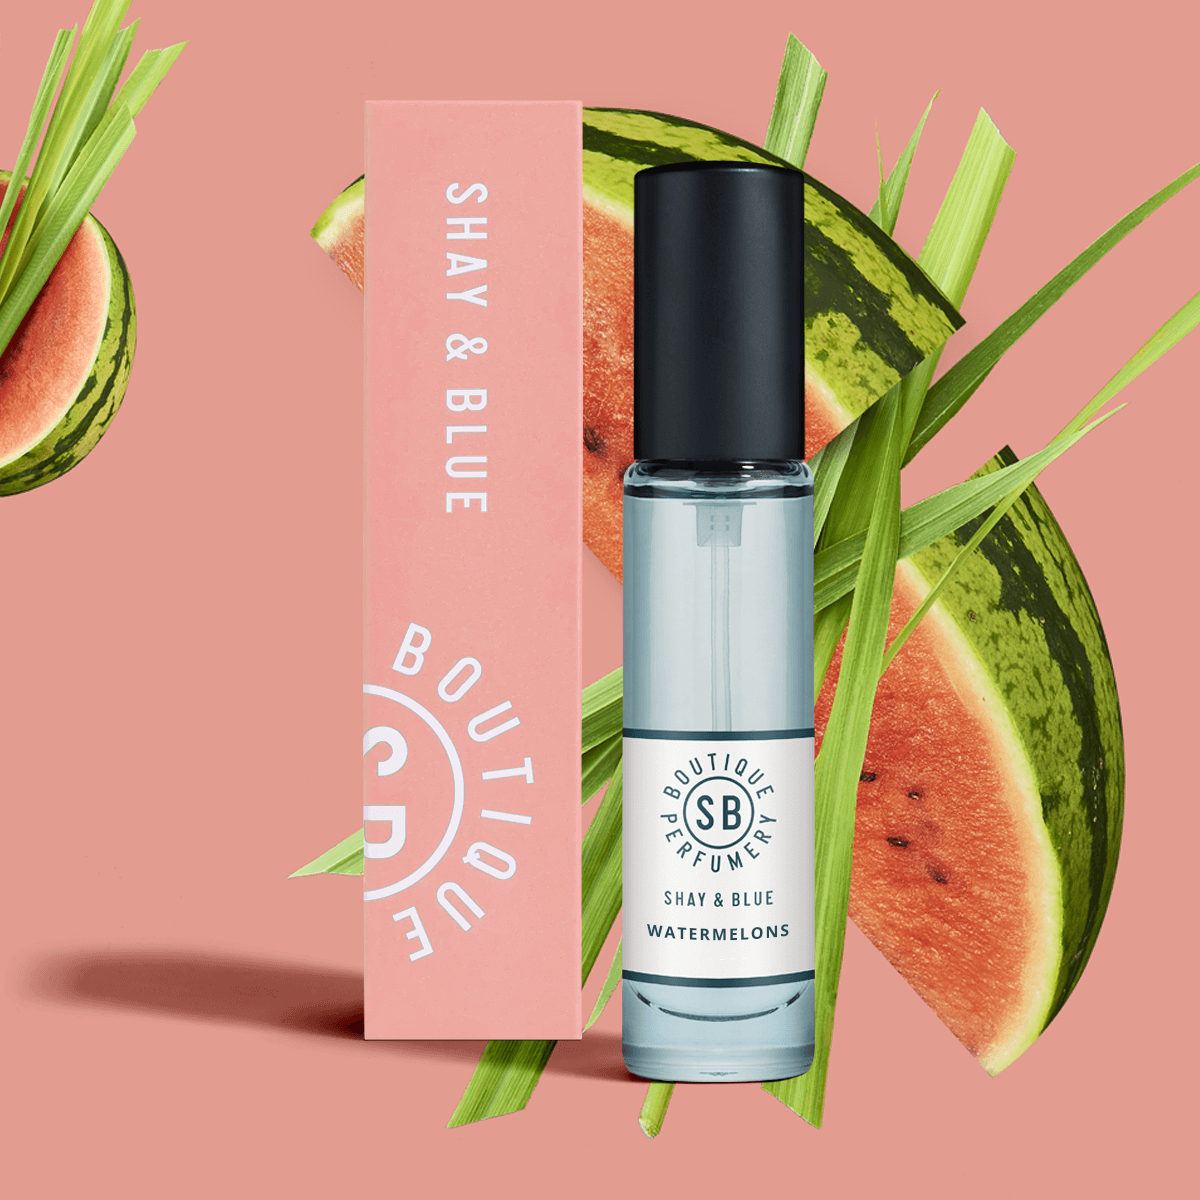 Watermelons Fragrance 10ml | Watermelon freshness with green mandarin and cut grass. | Clean All Gender Fragrance | Shay & Blue